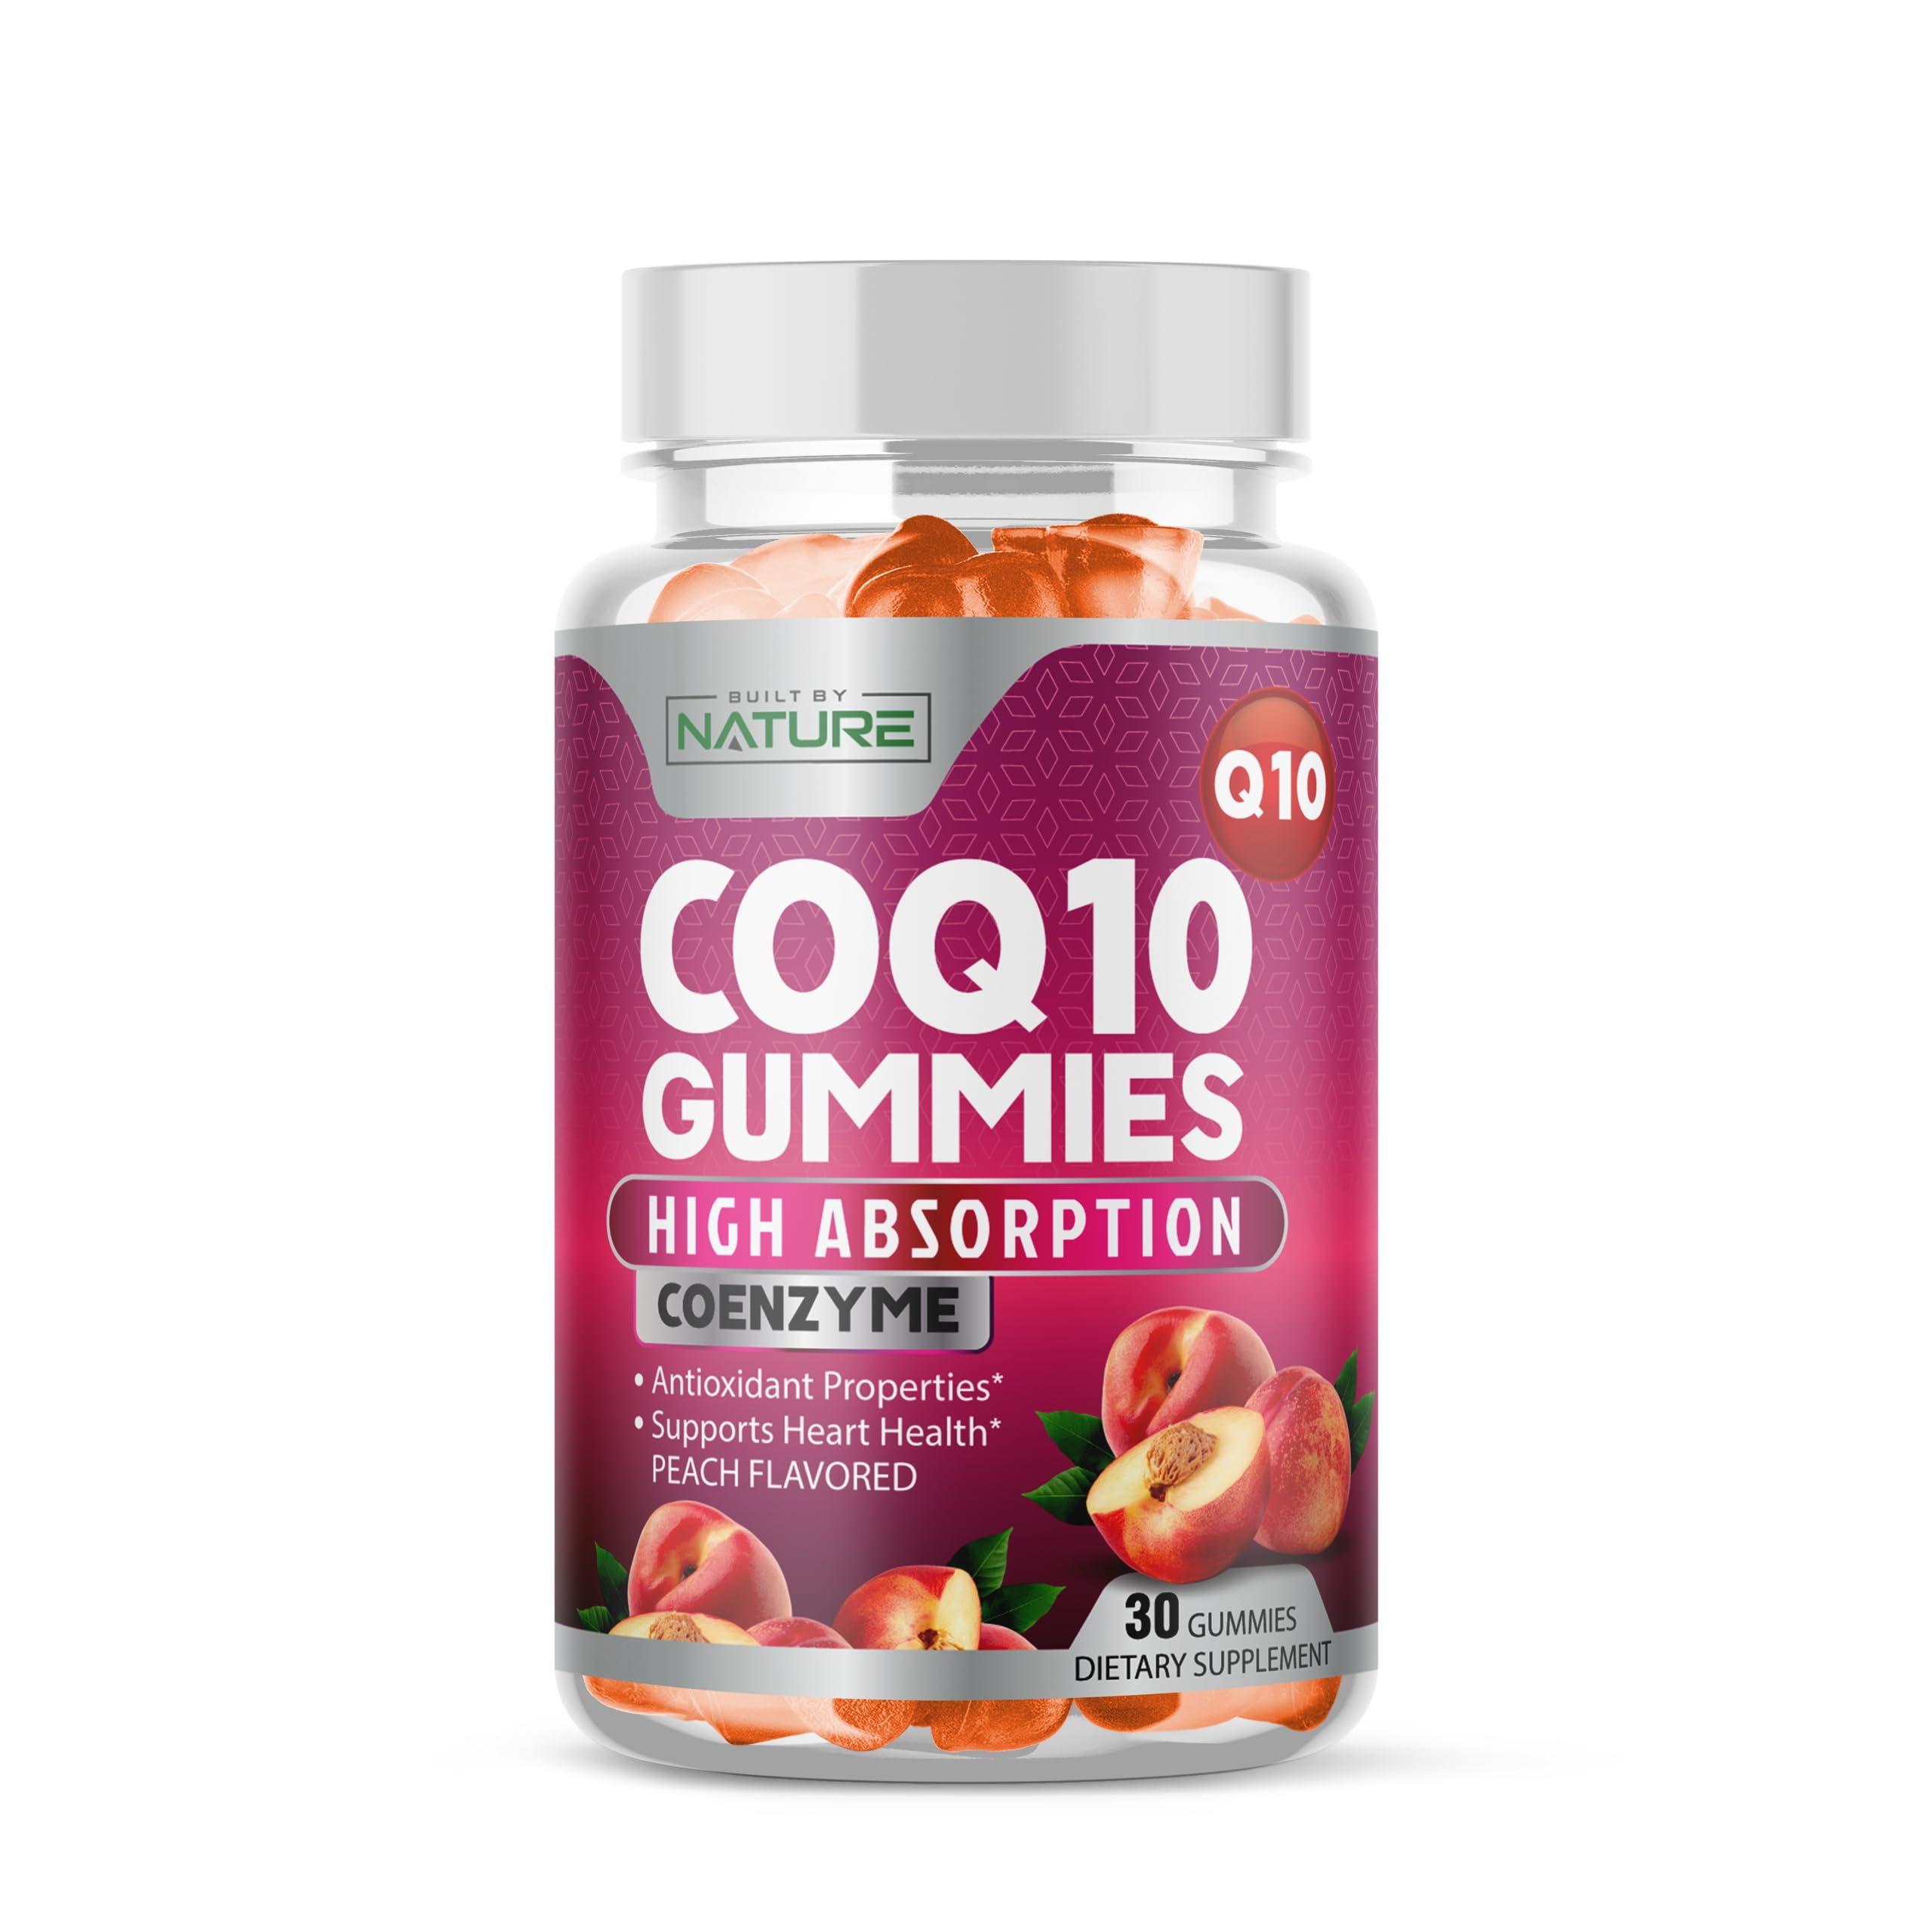 CoQ10 100mg Gummies, High Absorption Coenzyme Q10 Gummy, Heart Health & Energy Production Support, Rapid Release Antioxidant Supplement - Gluten Free, Naturally Fermented, 60 Count – 1 Month Supply